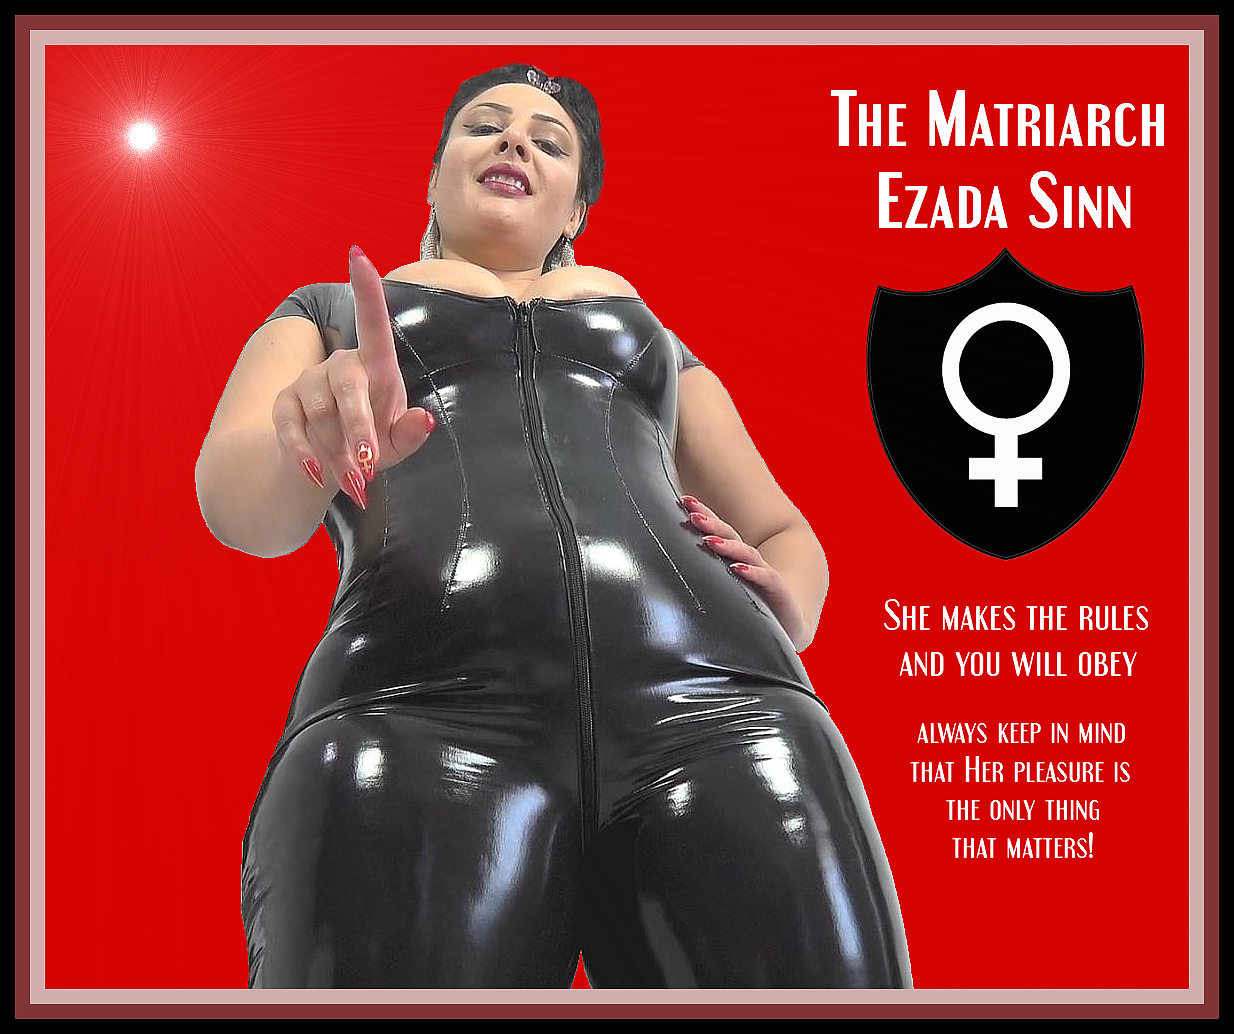 Photo by sluga0201 with the username @sluga0201,  January 5, 2020 at 6:32 PM. The post is about the topic Praising the Power of Matriarch Ezada Sinn and the text says 'The Matriarch makes the rules - all we have to do is to worship Her and to obey!'